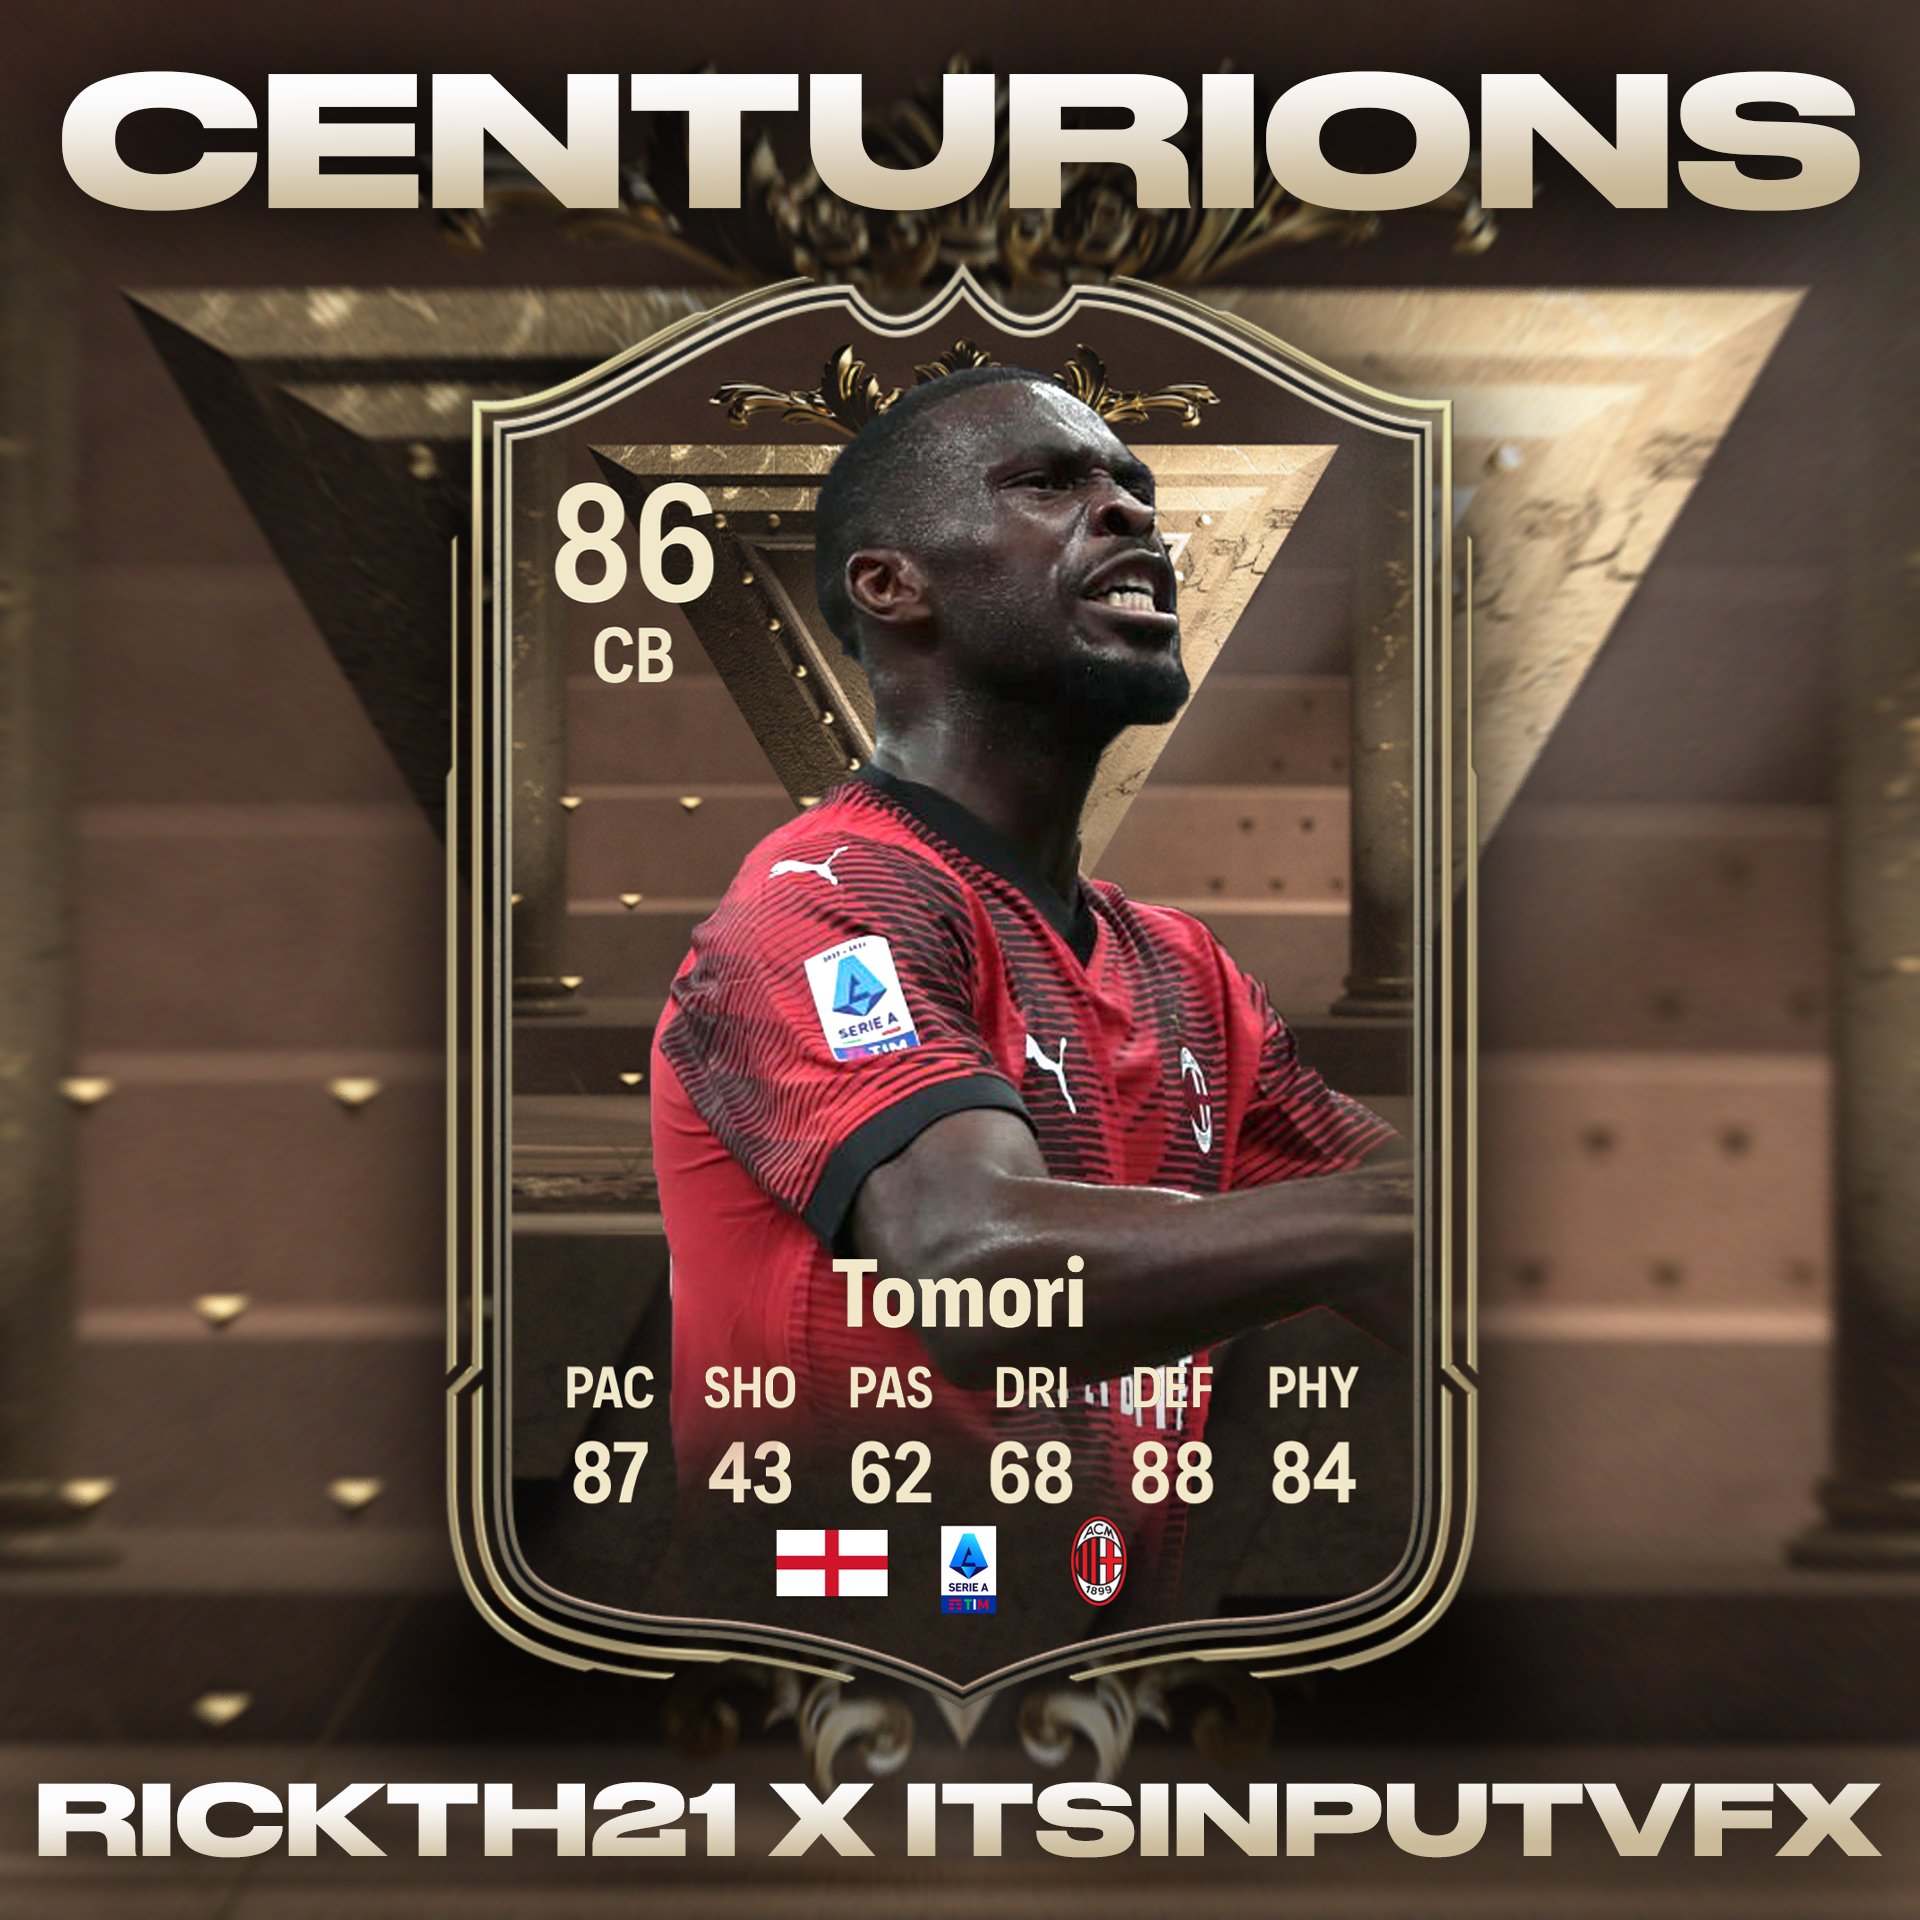 FUT Sheriff - Tomori🏴󠁧󠁢󠁥󠁮󠁧󠁿 is coming as CENTURIONS card